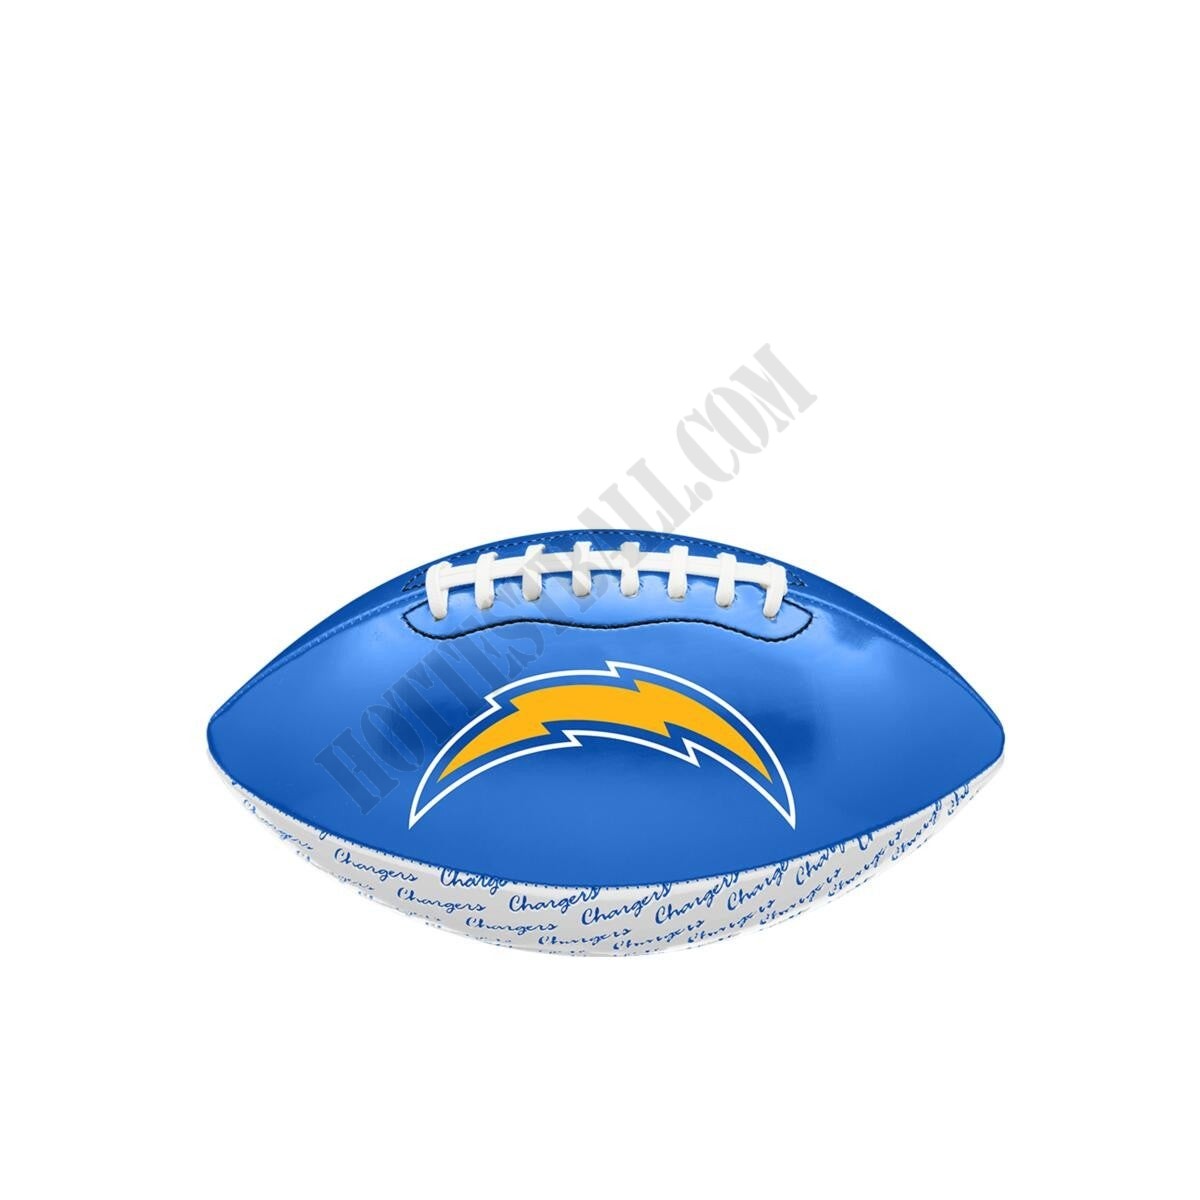 NFL City Pride Football - Los Angeles Chargers ● Wilson Promotions - NFL City Pride Football - Los Angeles Chargers ● Wilson Promotions